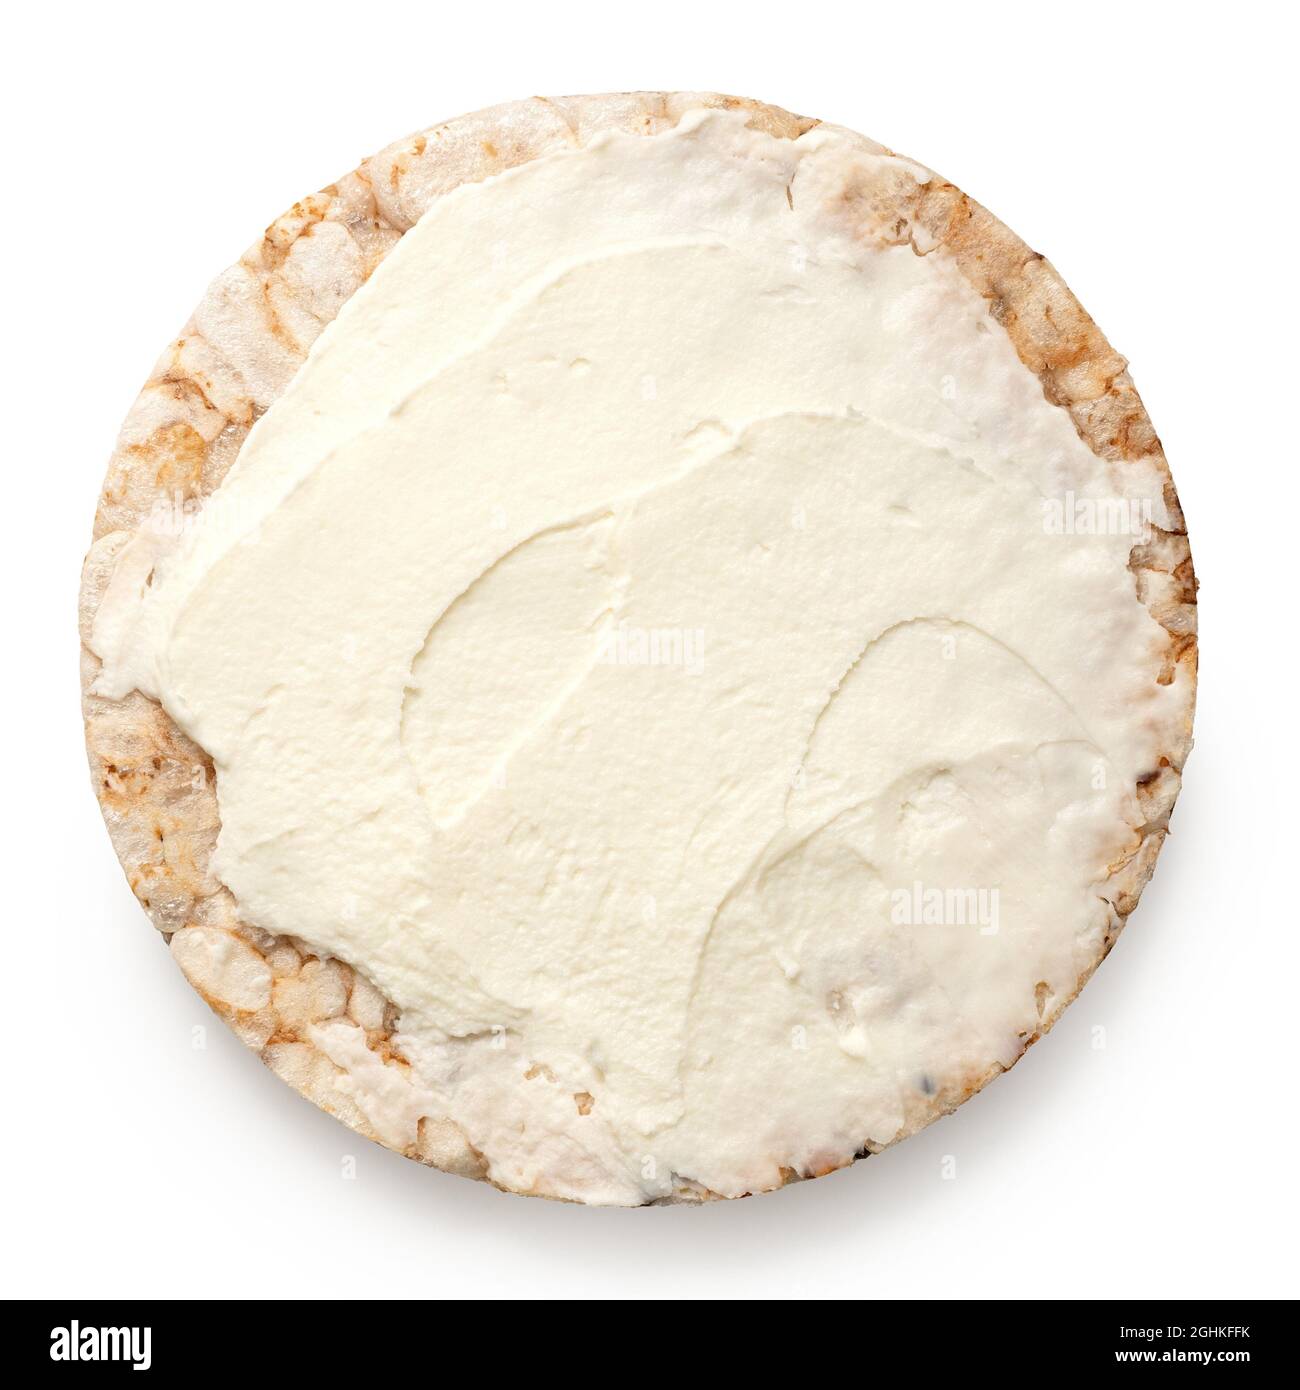 Puffed brown rice cake with cream cheese spread isolated on white. Top view. Stock Photo